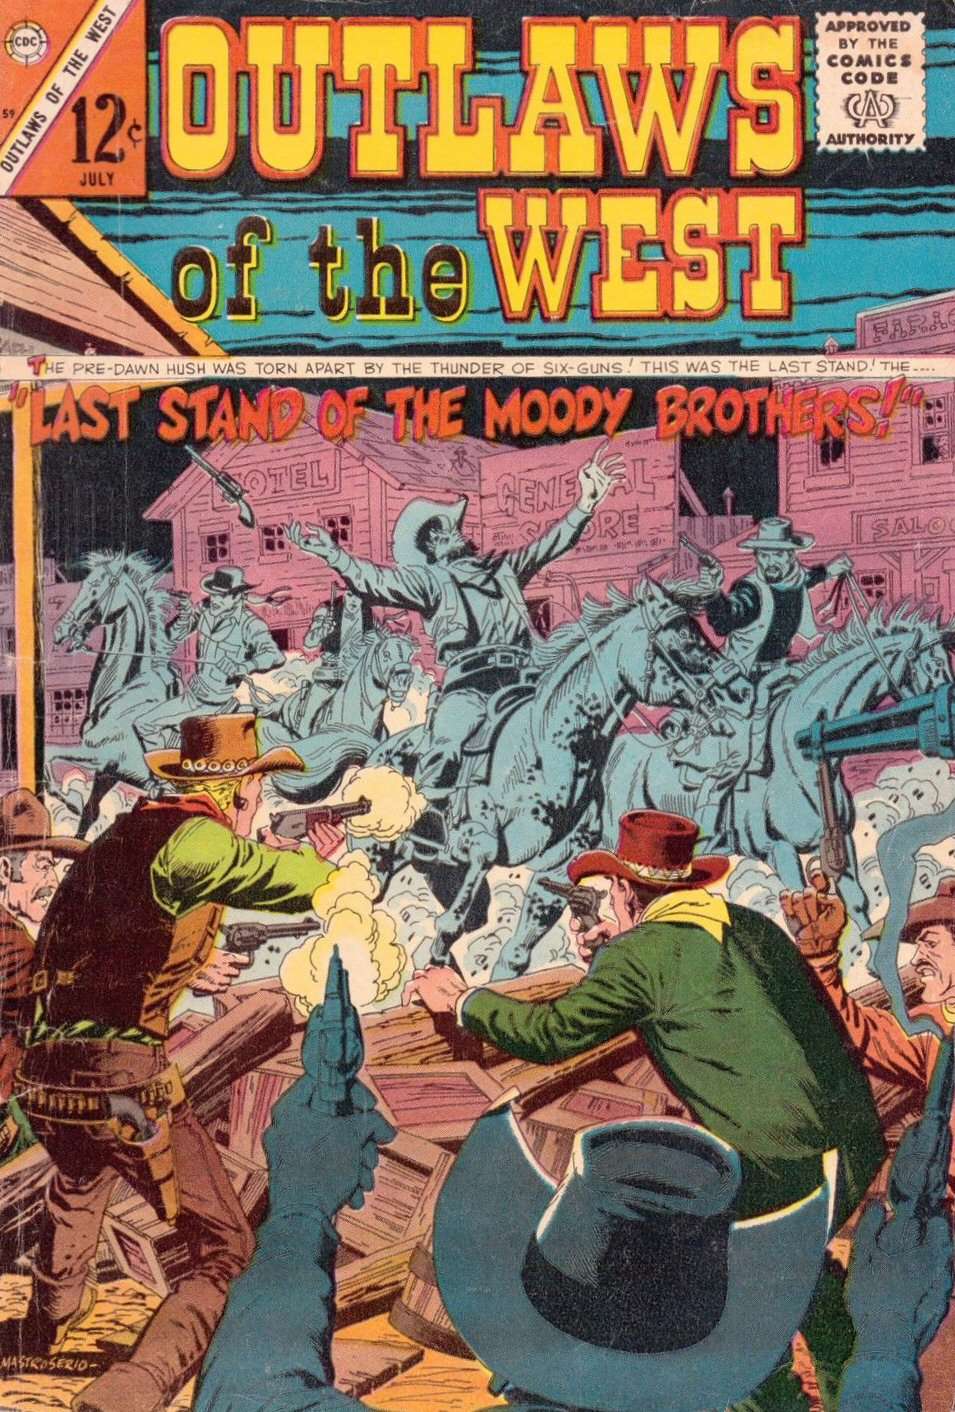 Comic Book Cover For Outlaws of the West 59